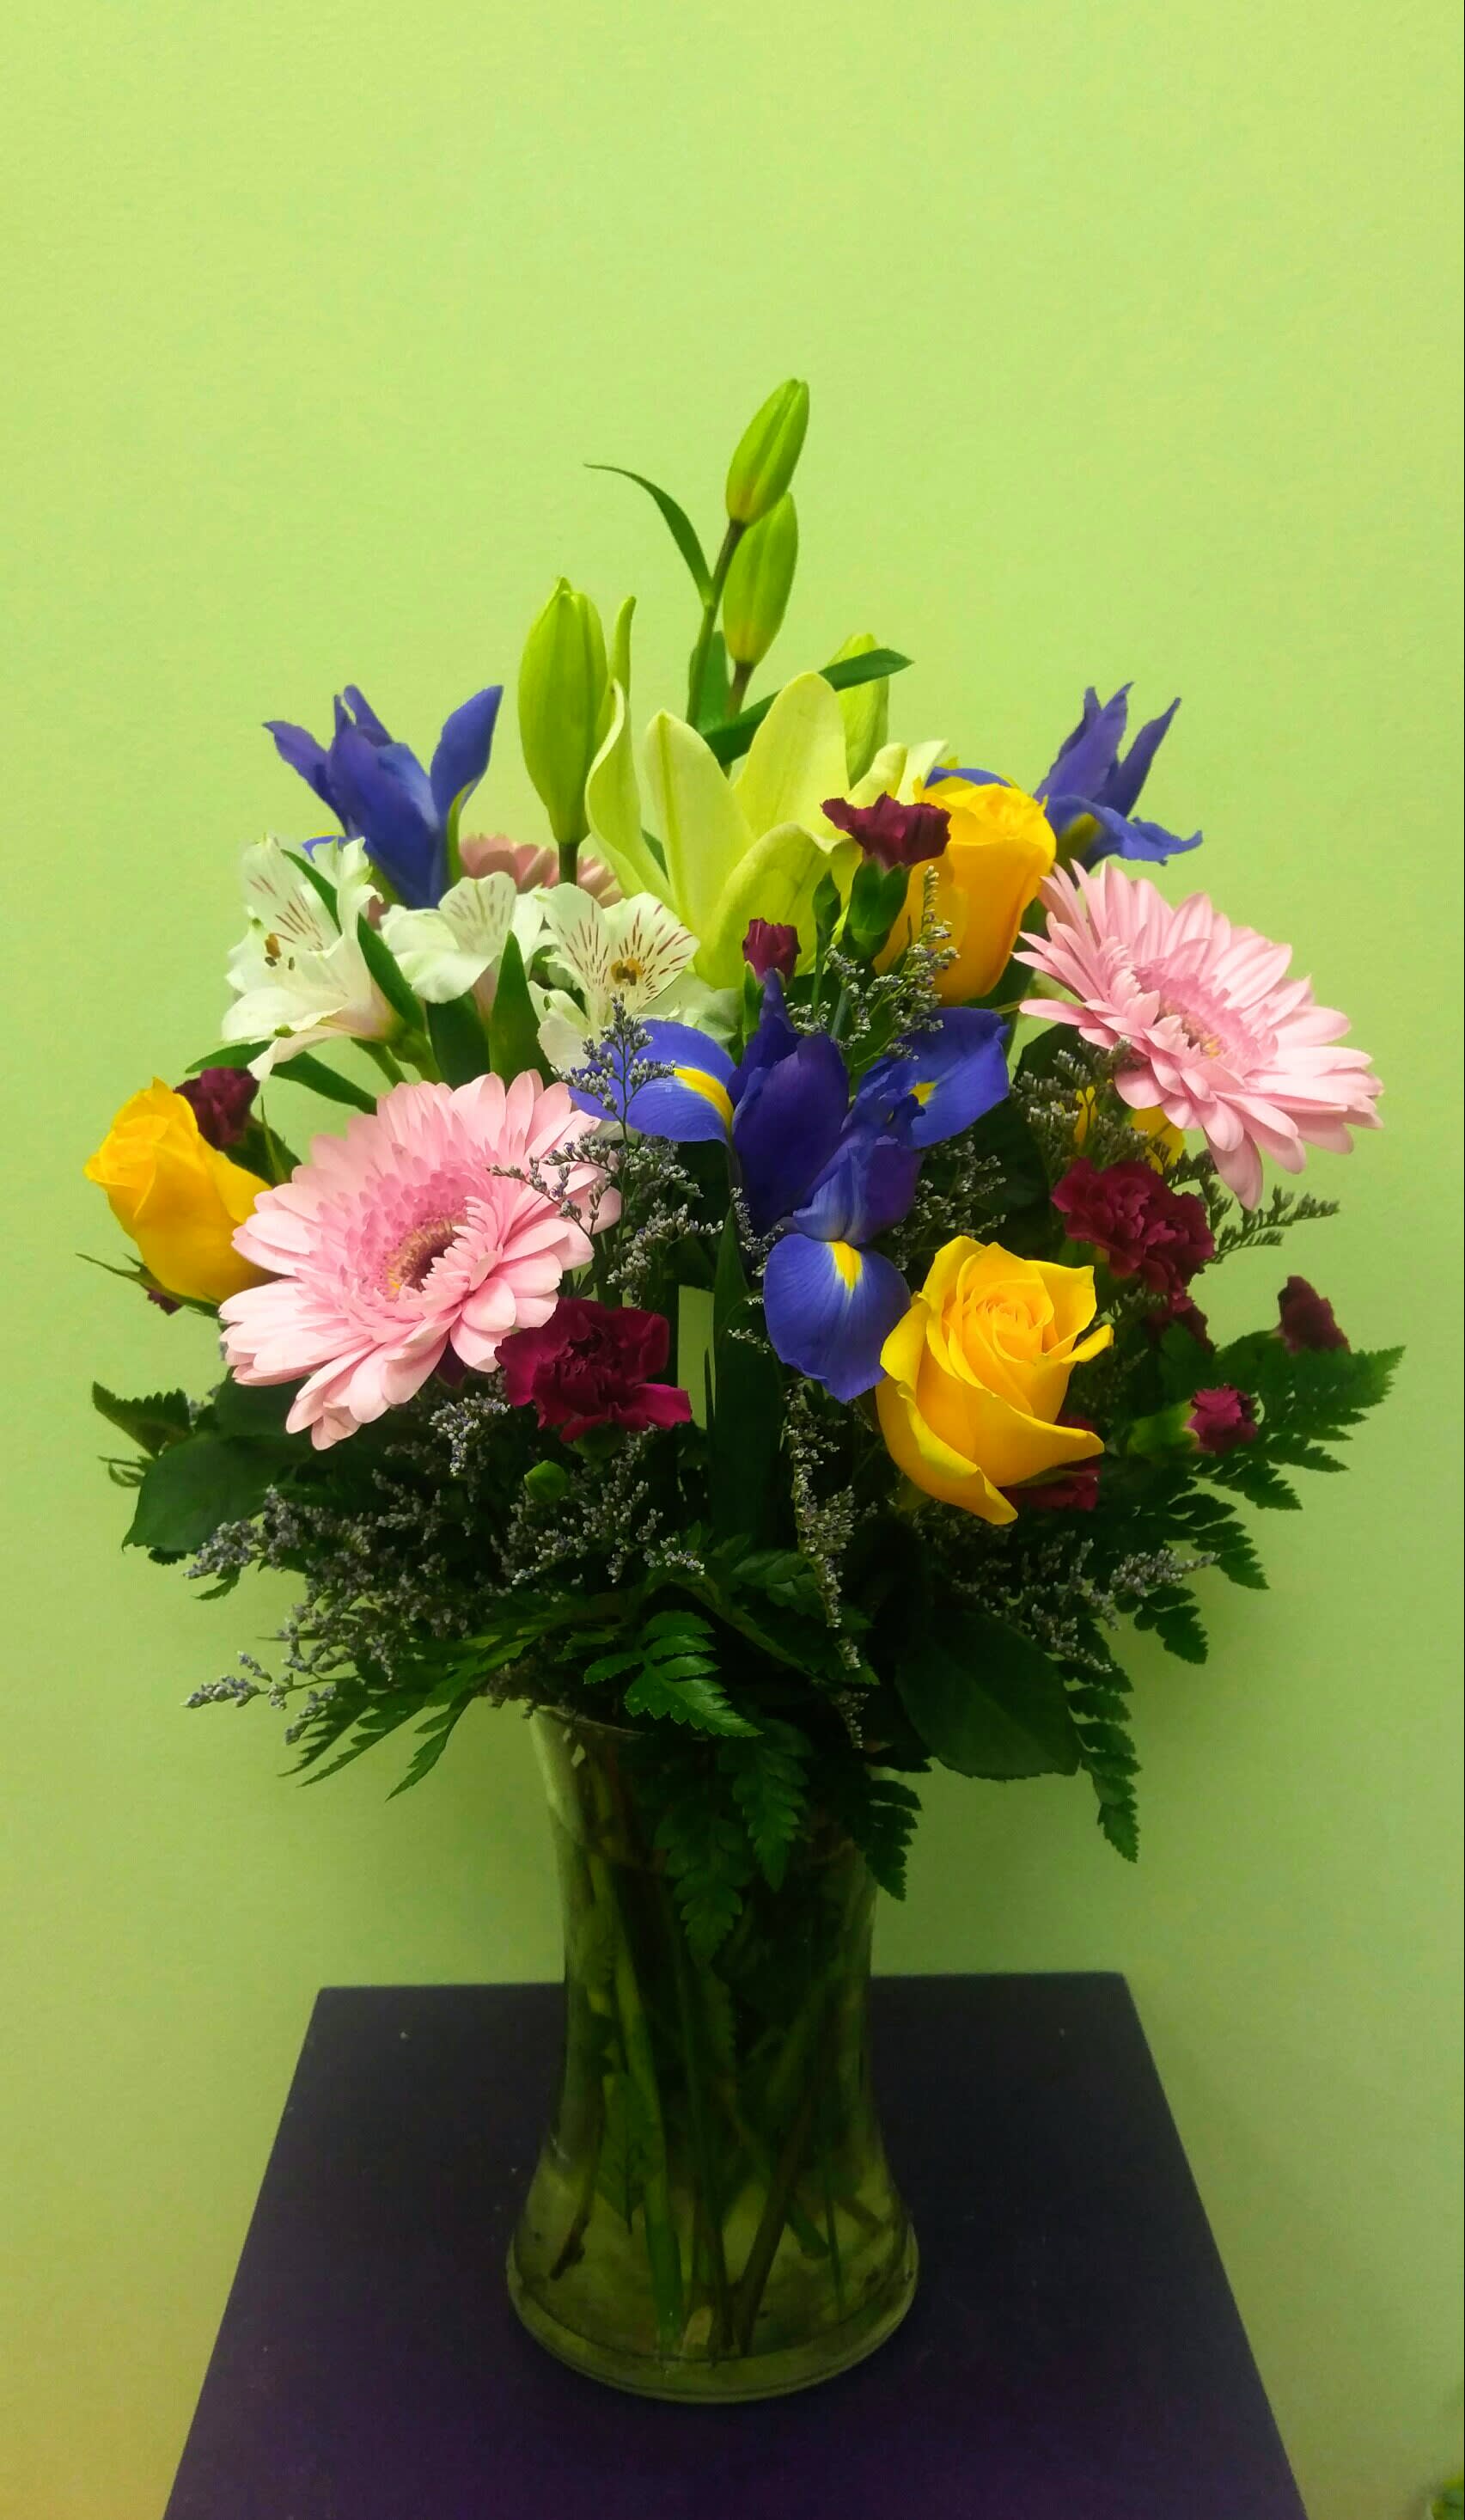 Sensational Spring - This sensational bouquet is full of spring colors, flowers, and feeling. It is a gorgeous arrangement that includes lilies, iris, roses, gerbera daisies and more! Really make them smile this season!